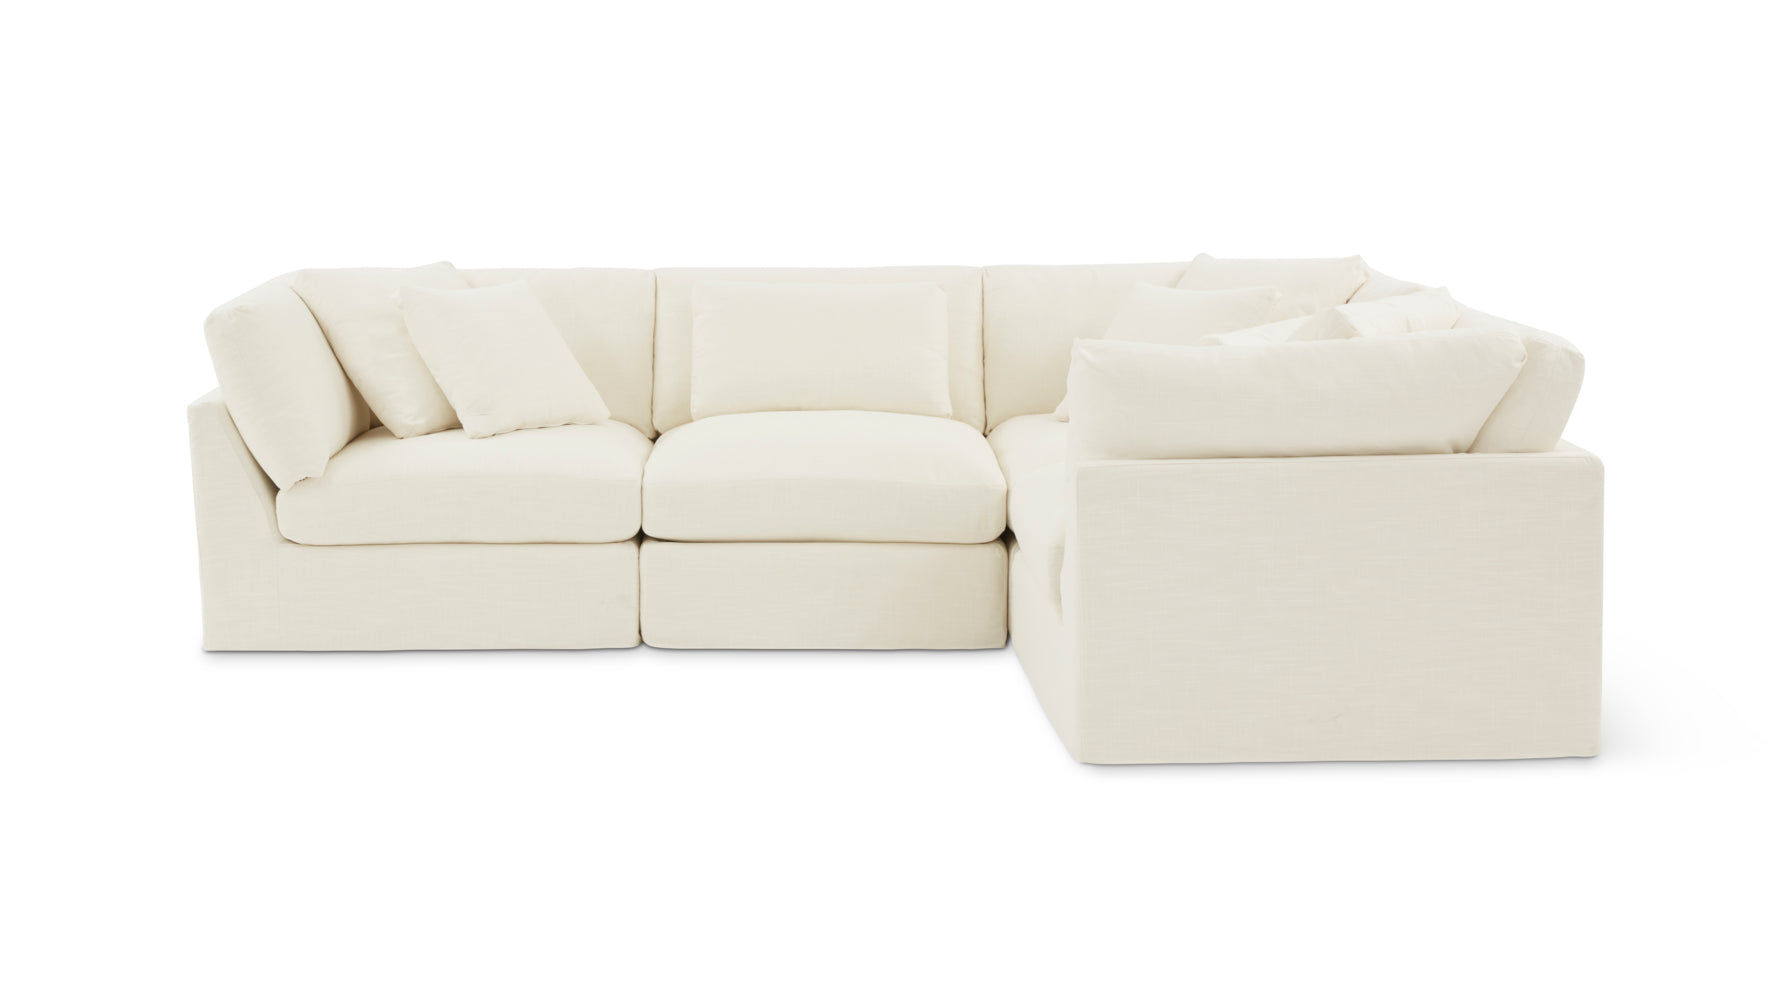 Get Together™ 4-Piece Modular Sectional Closed, Large, Cream Linen - Image 1